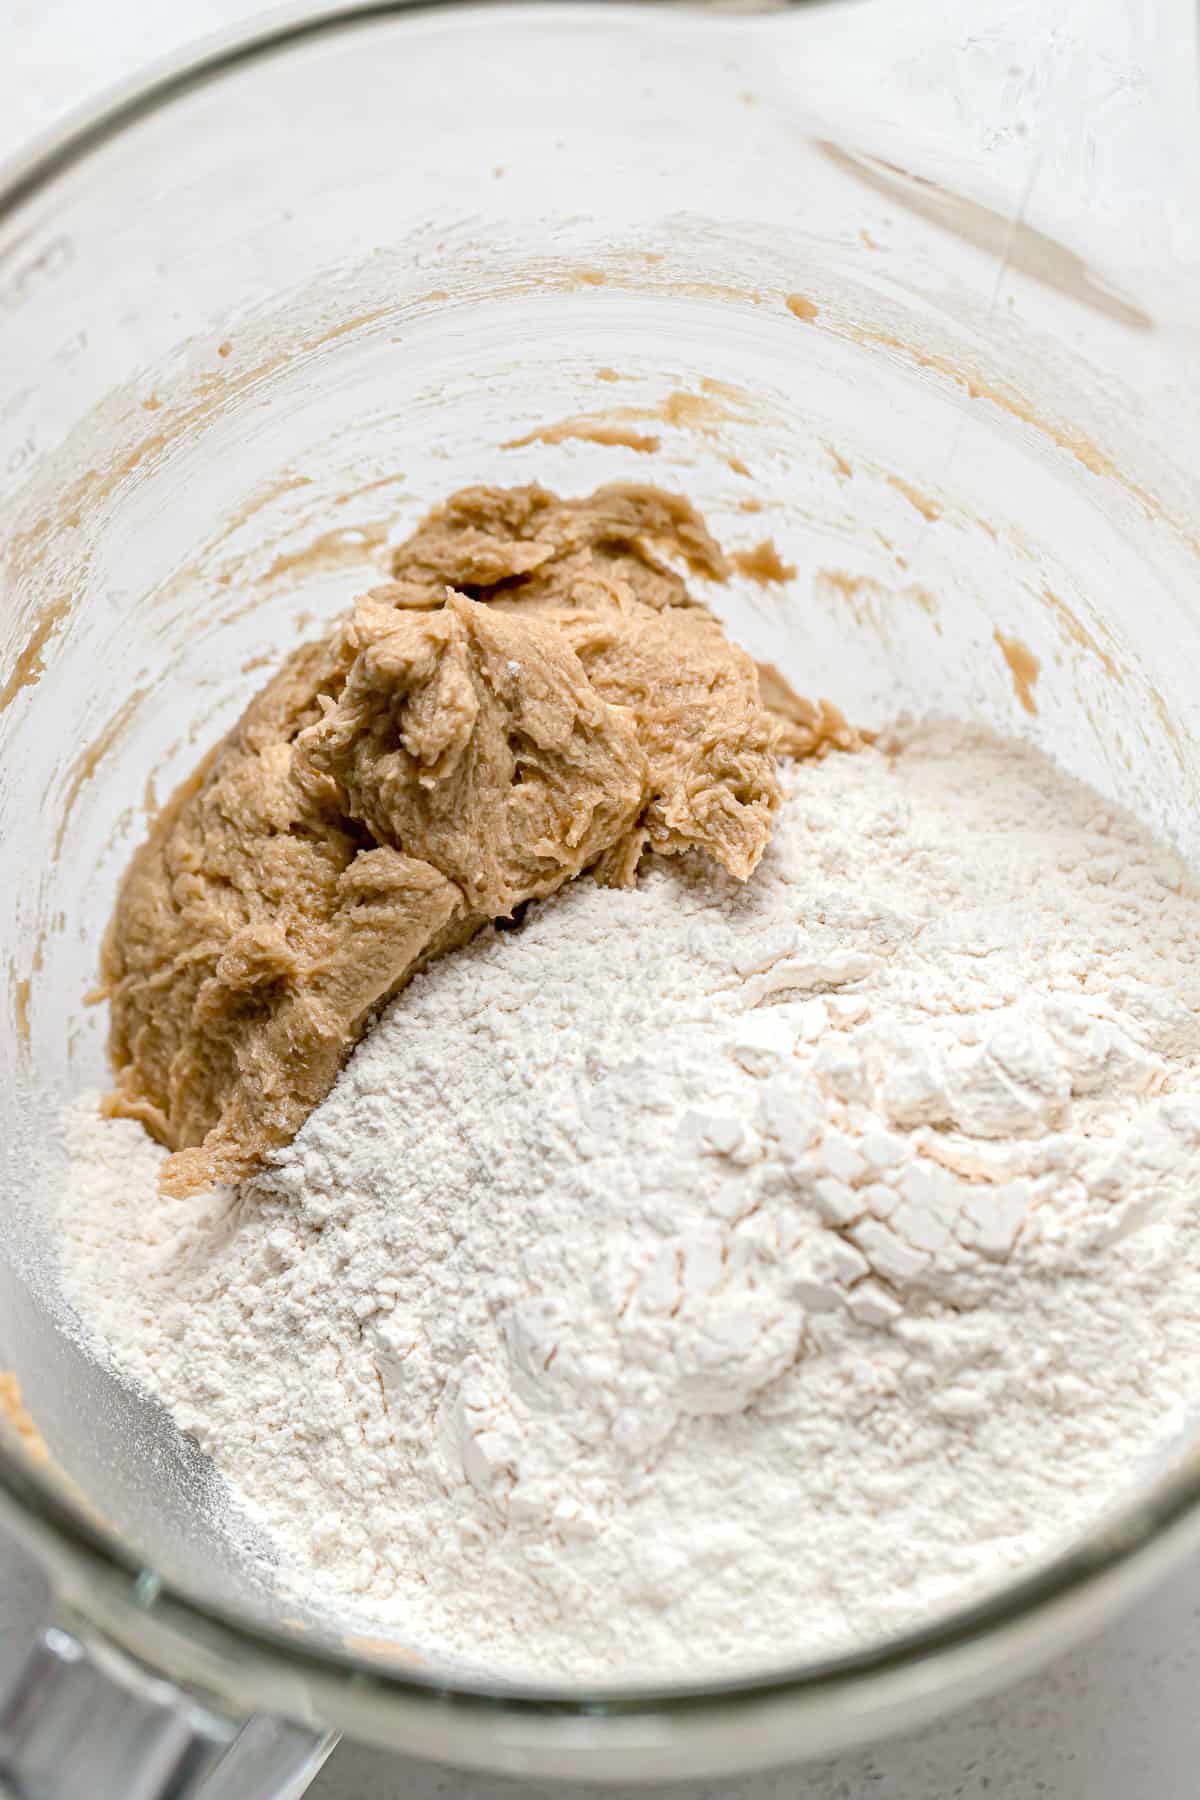 dry ingredients added to dough